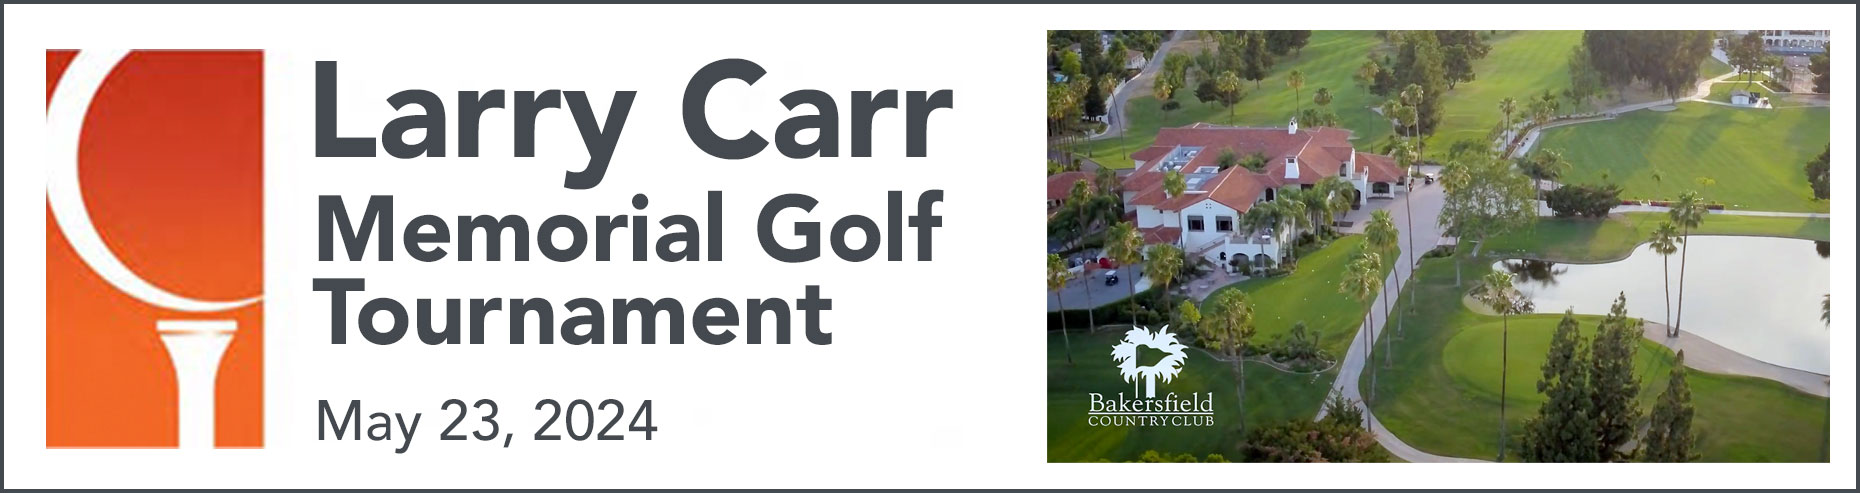 Larry Carr Memorial Golf Tournament - Text and photo of Bakersfield Country Club